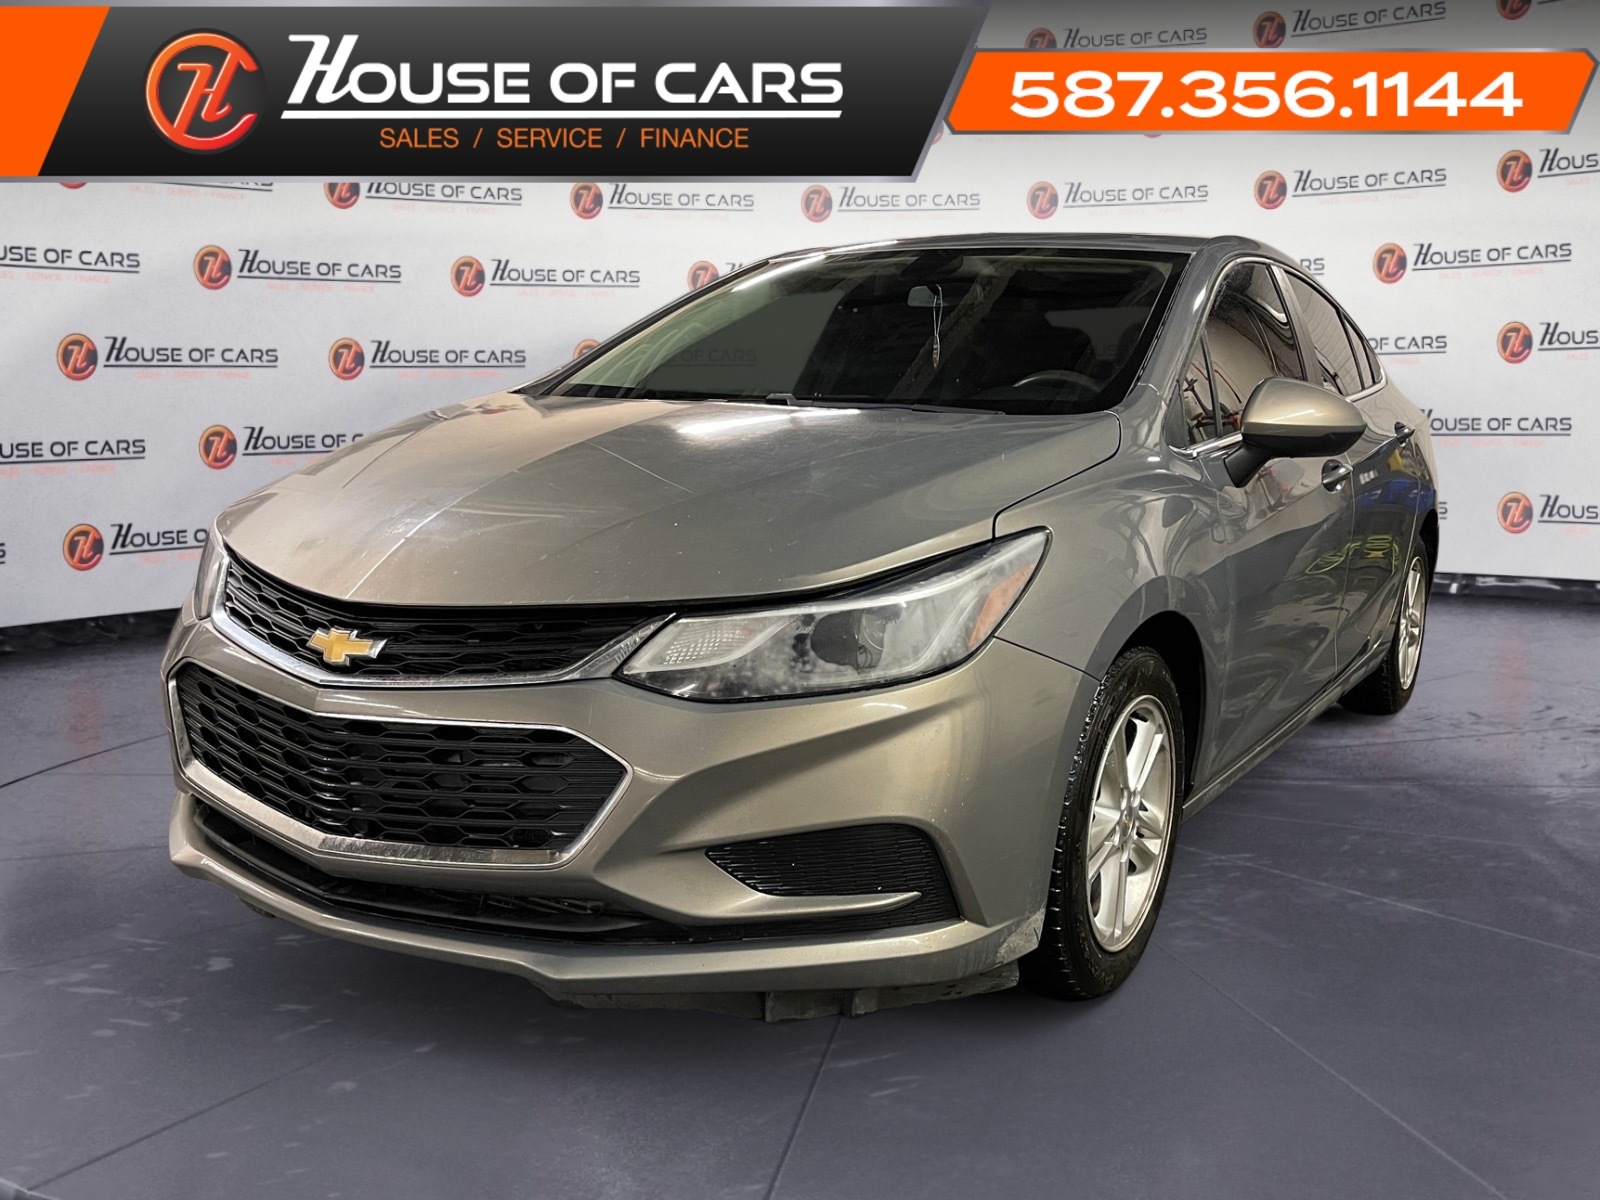 2018 Chevrolet Cruze LT w/ Back Up Cam / Heated Seats / Winter Tires